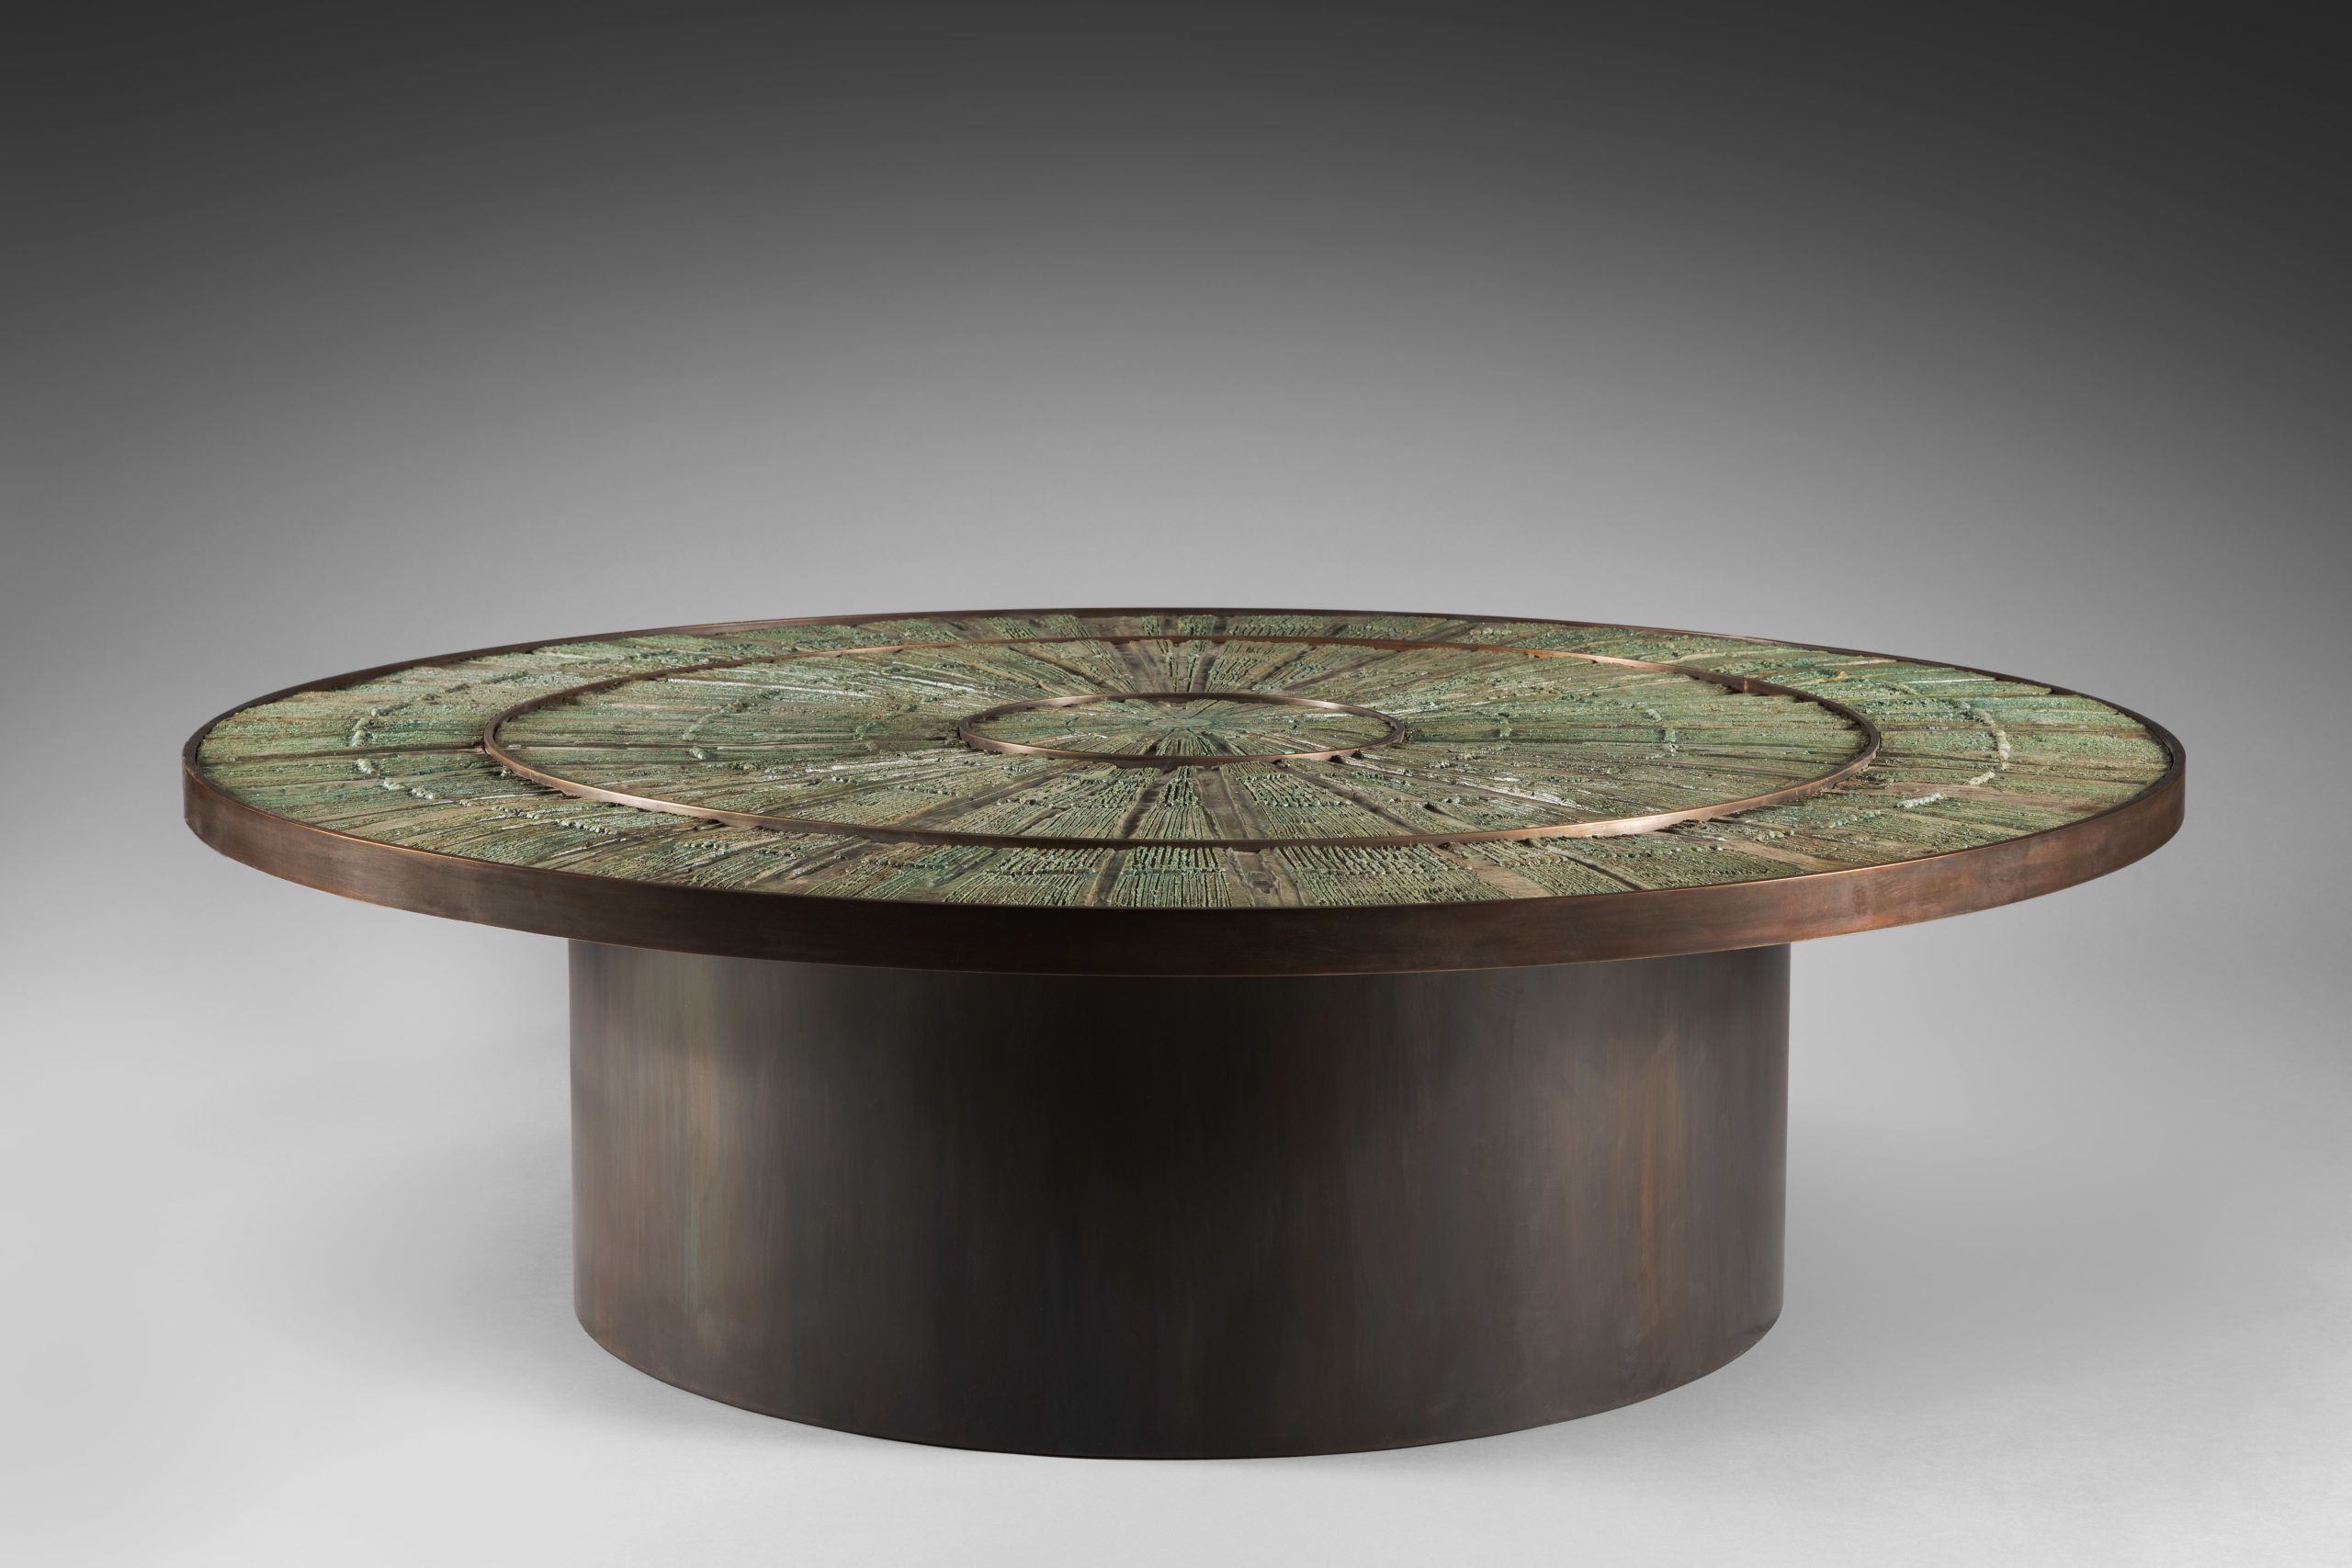 Copper green “Starburst” coffee table